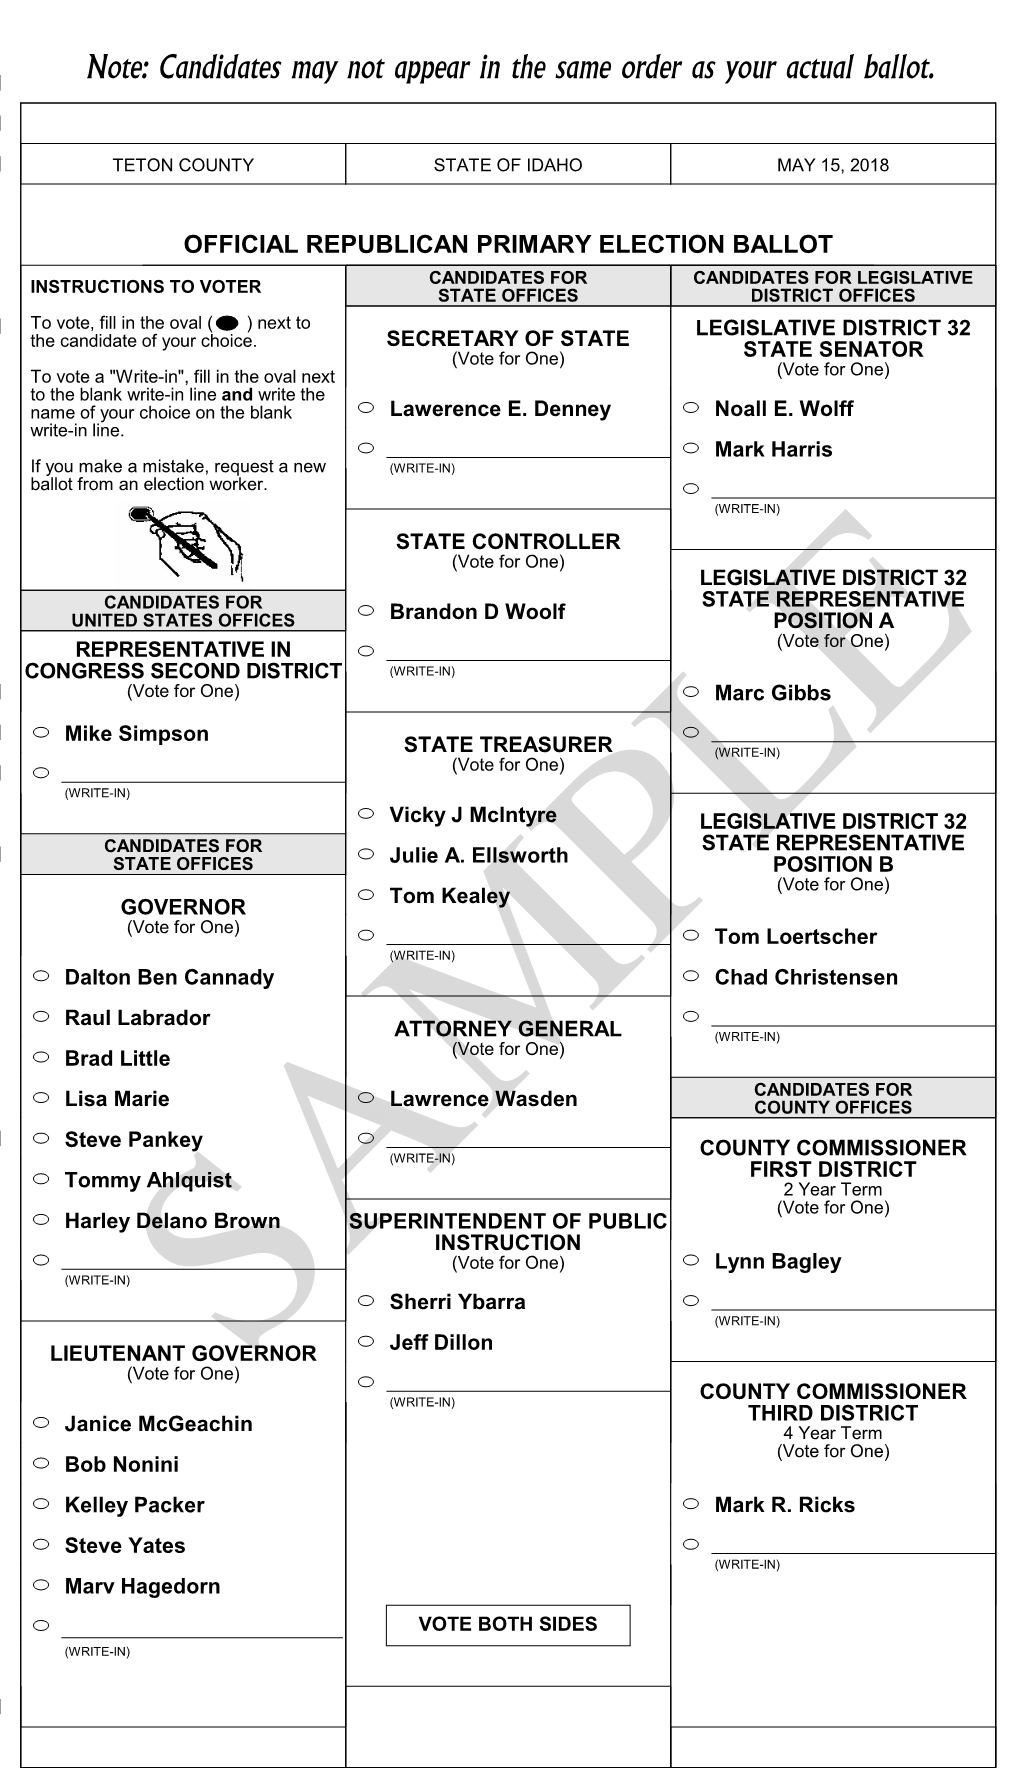 Candidates May Not Appear in the Same Order As Your Actual Ballot